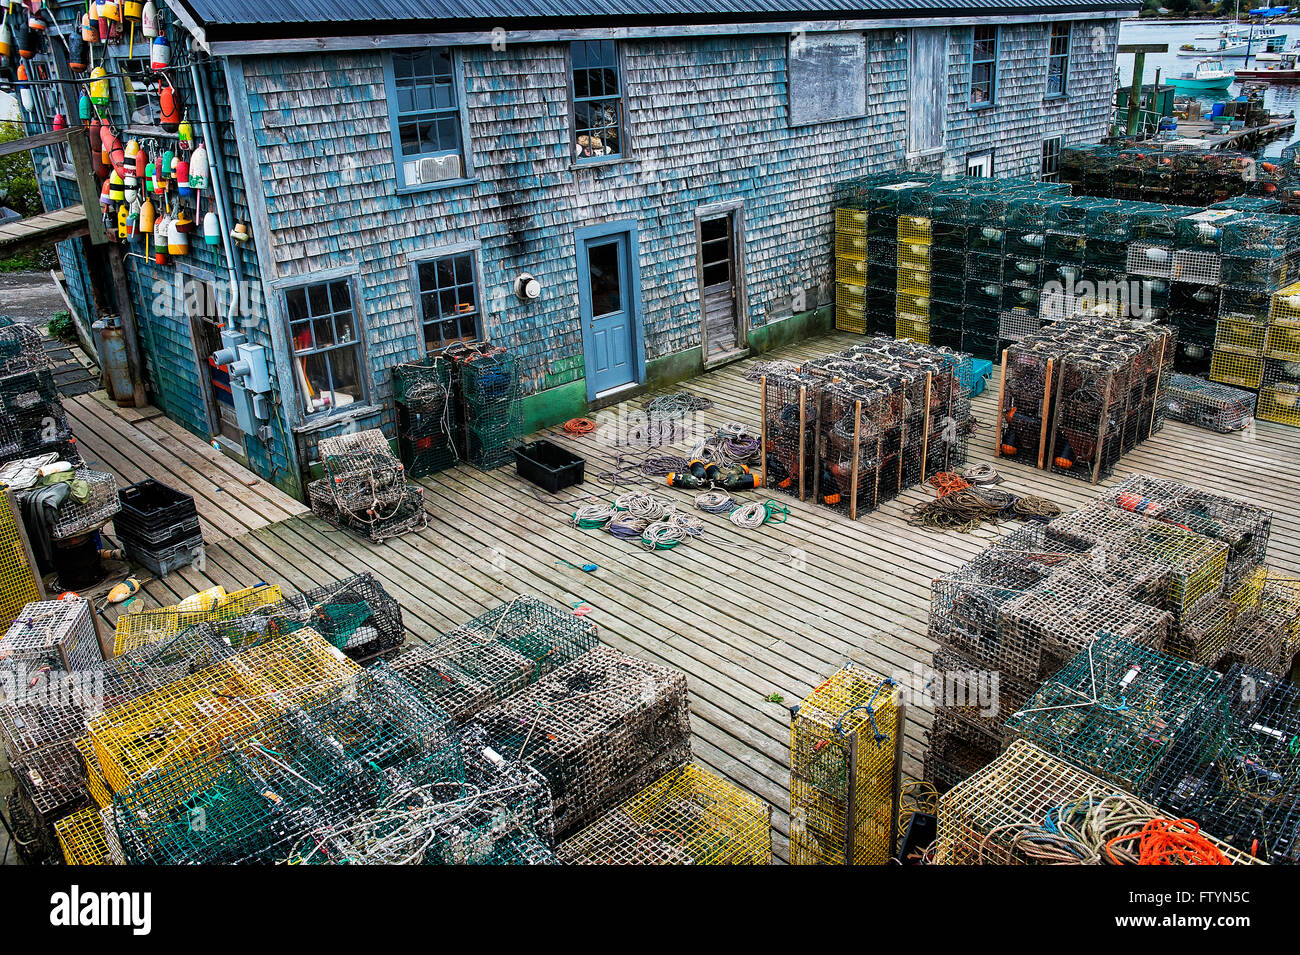 Lobster traps and warehouse, Bernard, Maine, USA Stock Photo